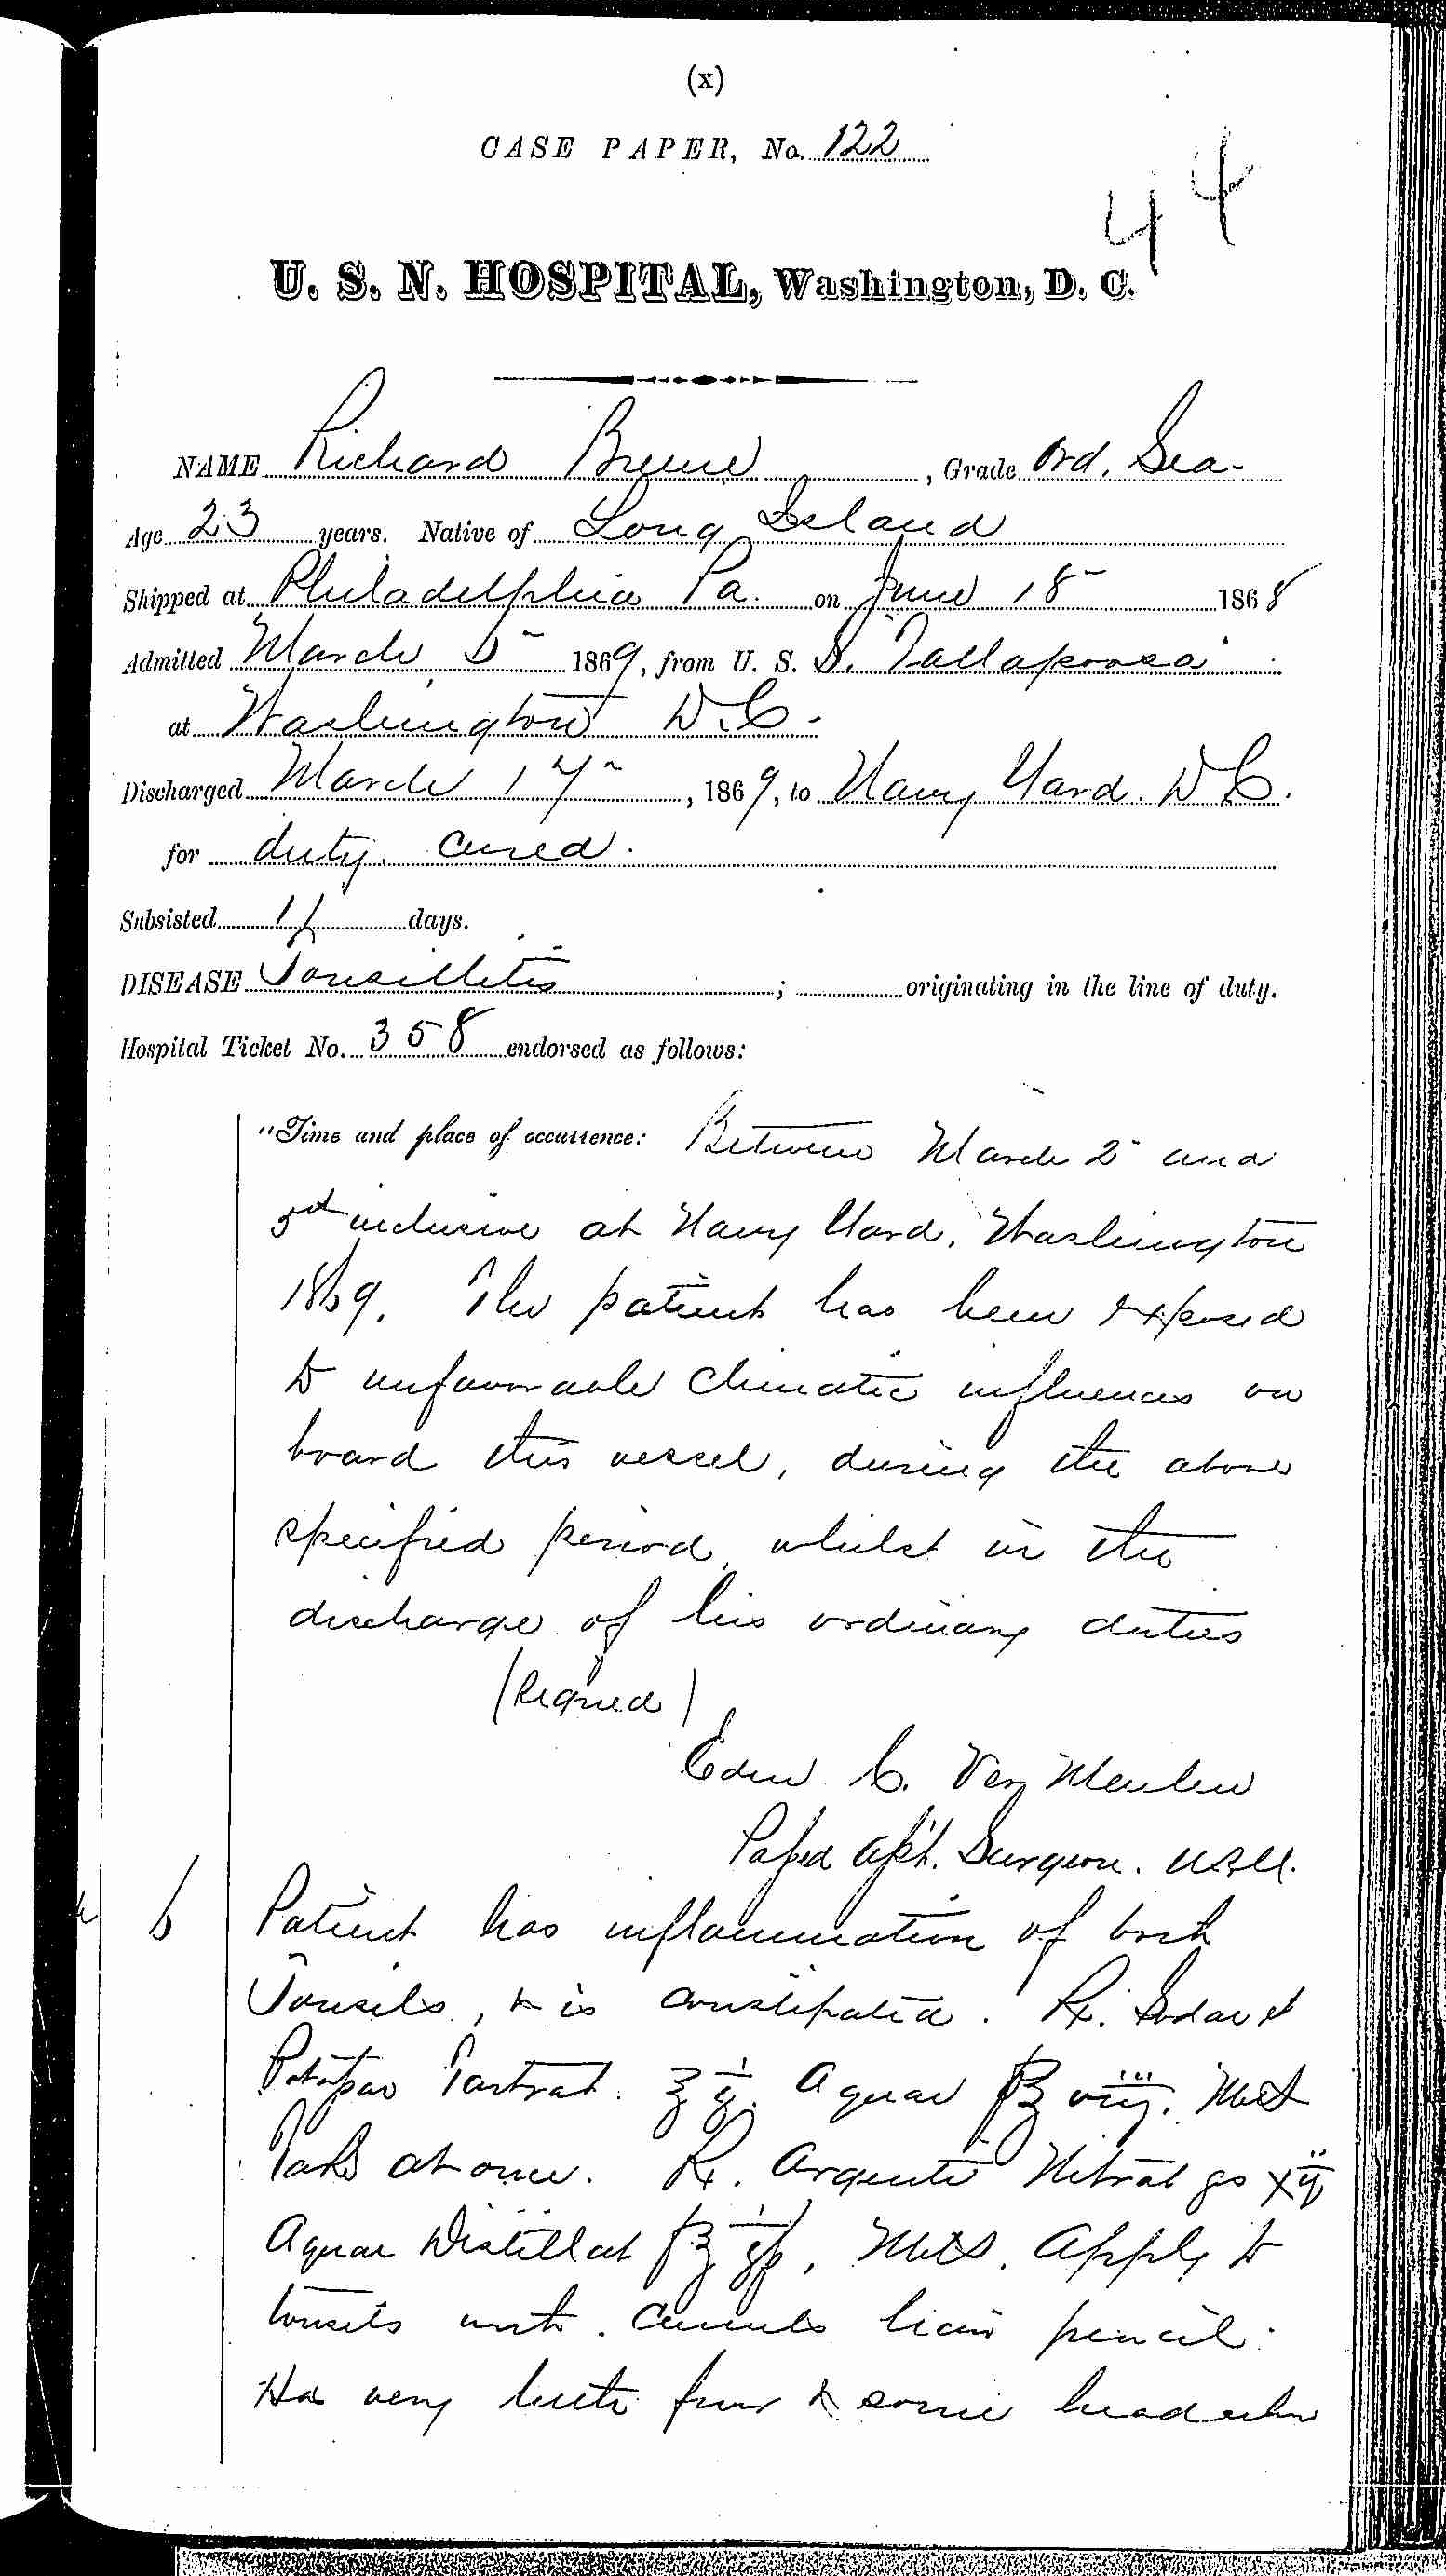 Entry for Richard Breene (page 1 of 2) in the log Hospital Tickets and Case Papers - Naval Hospital - Washington, D.C. - 1868-69